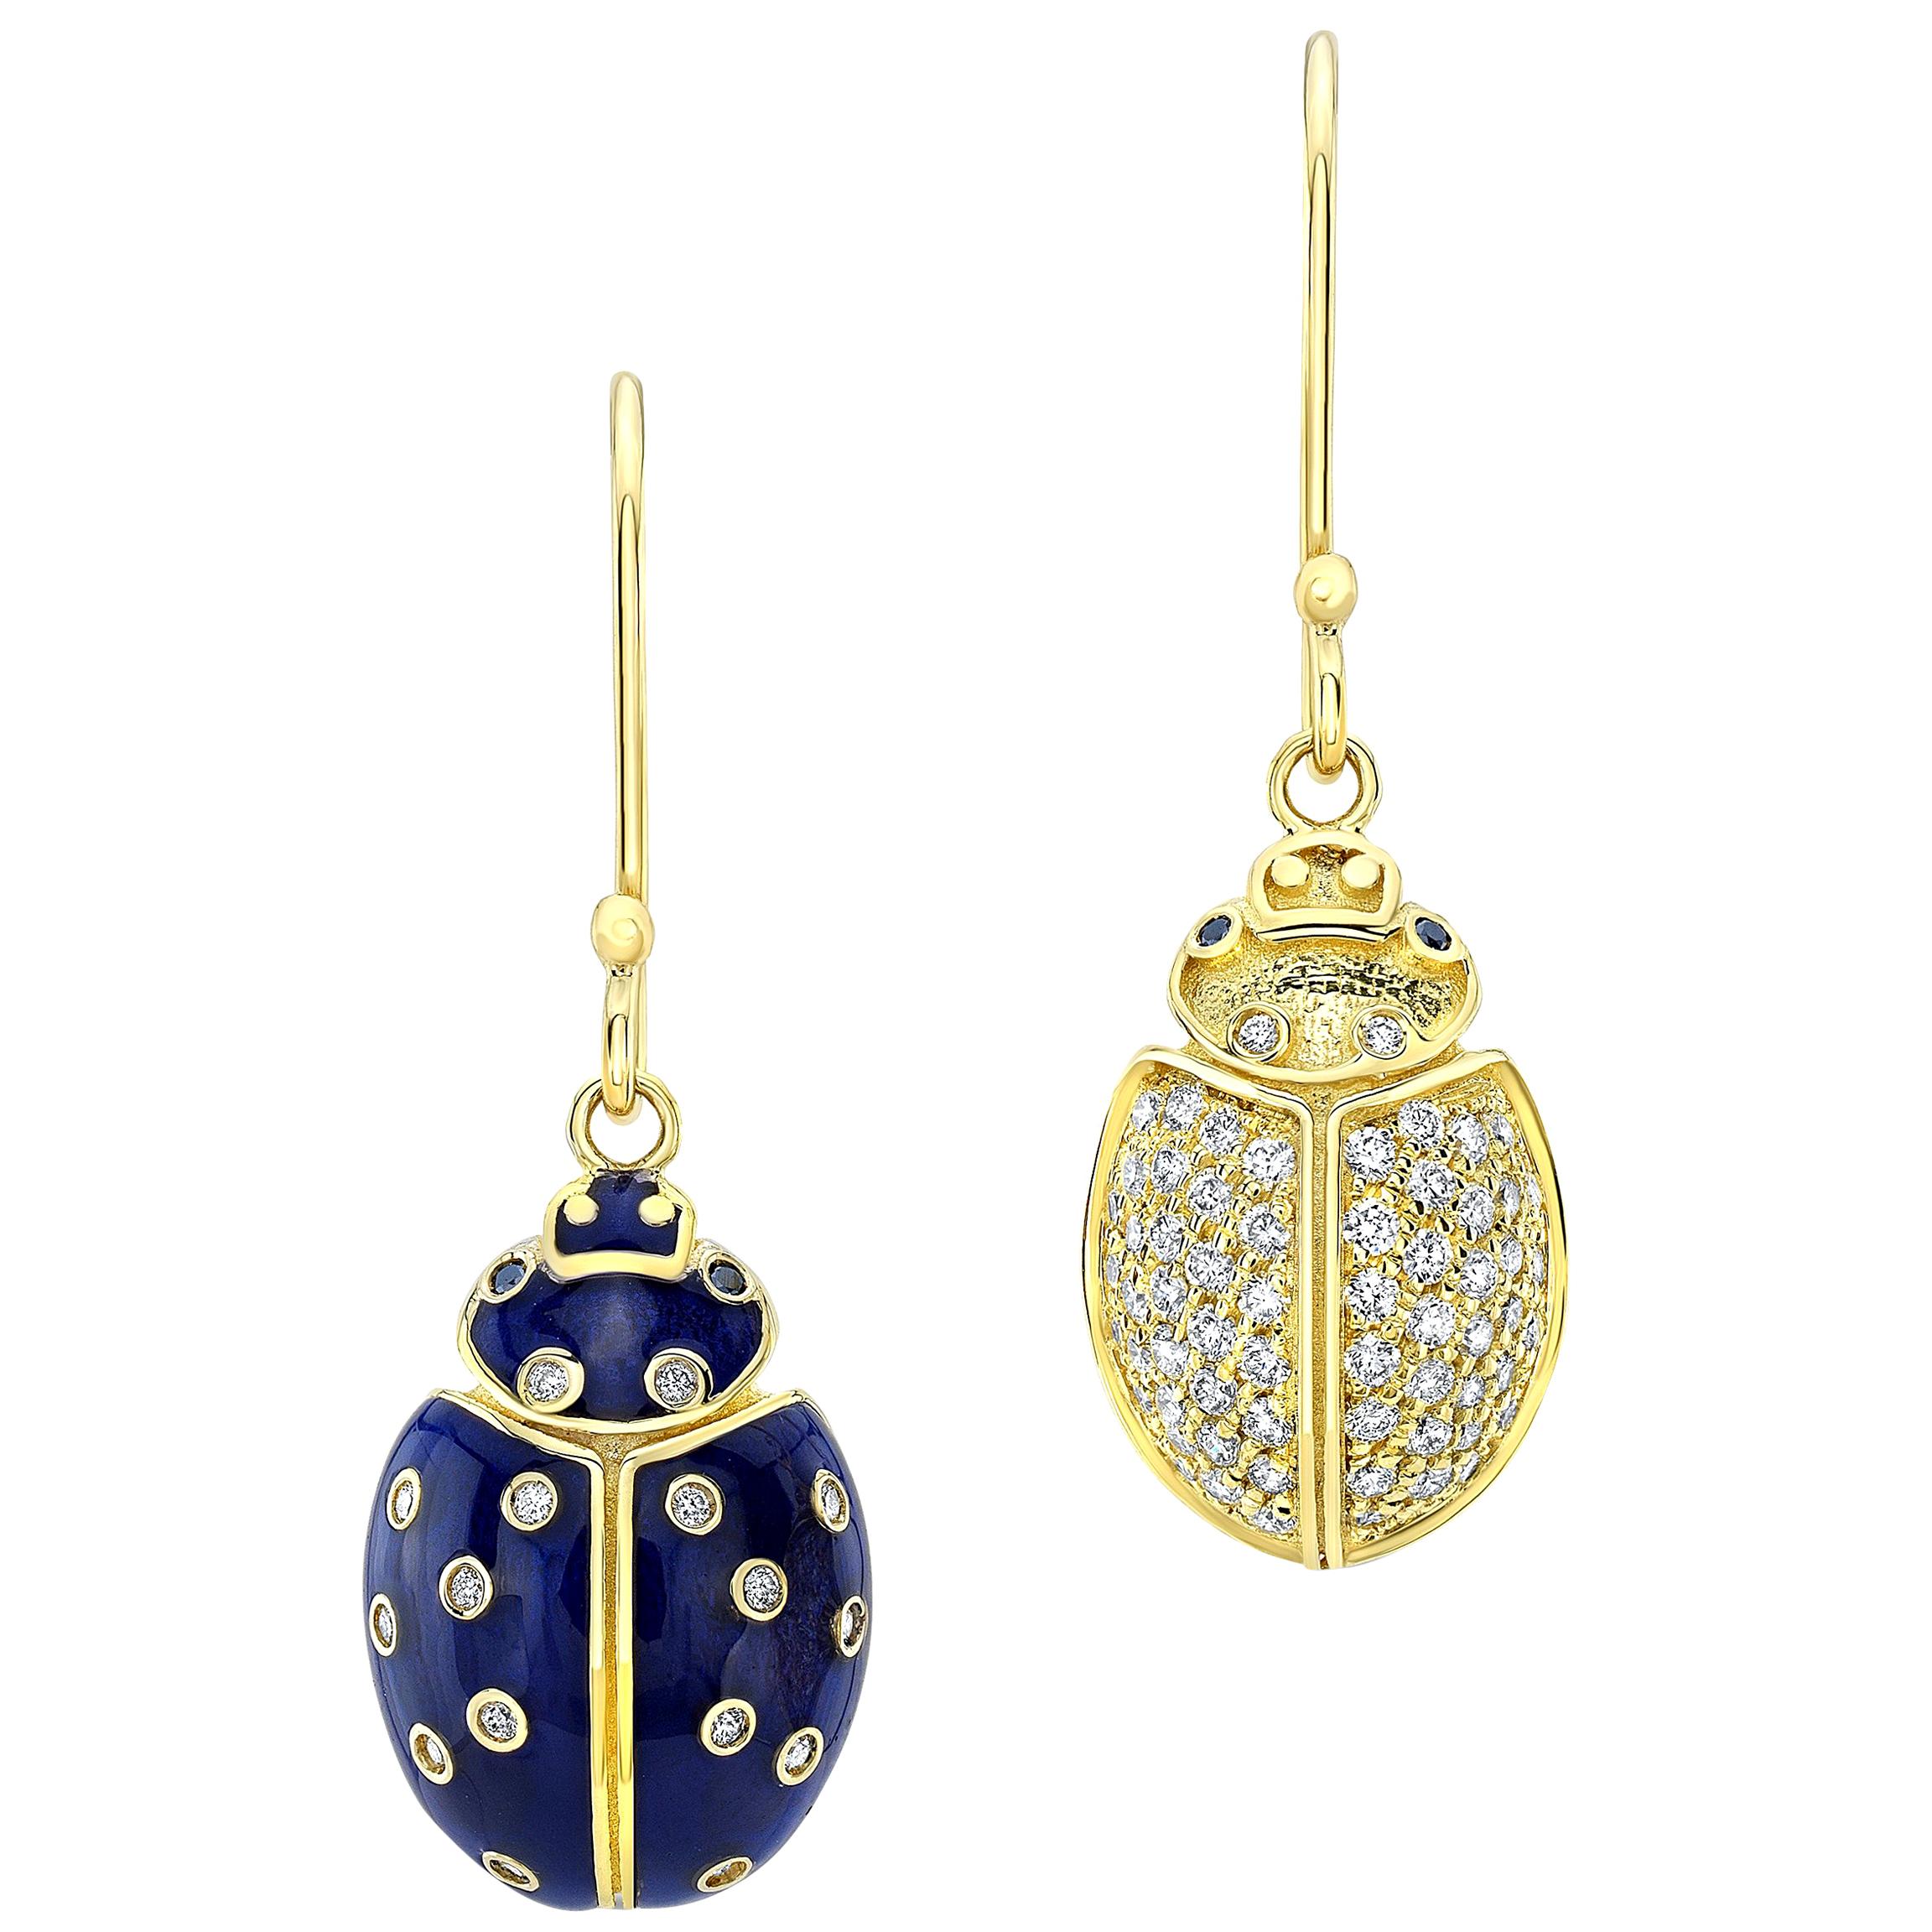 Amy Y Contemporary 18 Gold, Diamond and Enamel Ladybug Earring 'Ella and Levi' For Sale